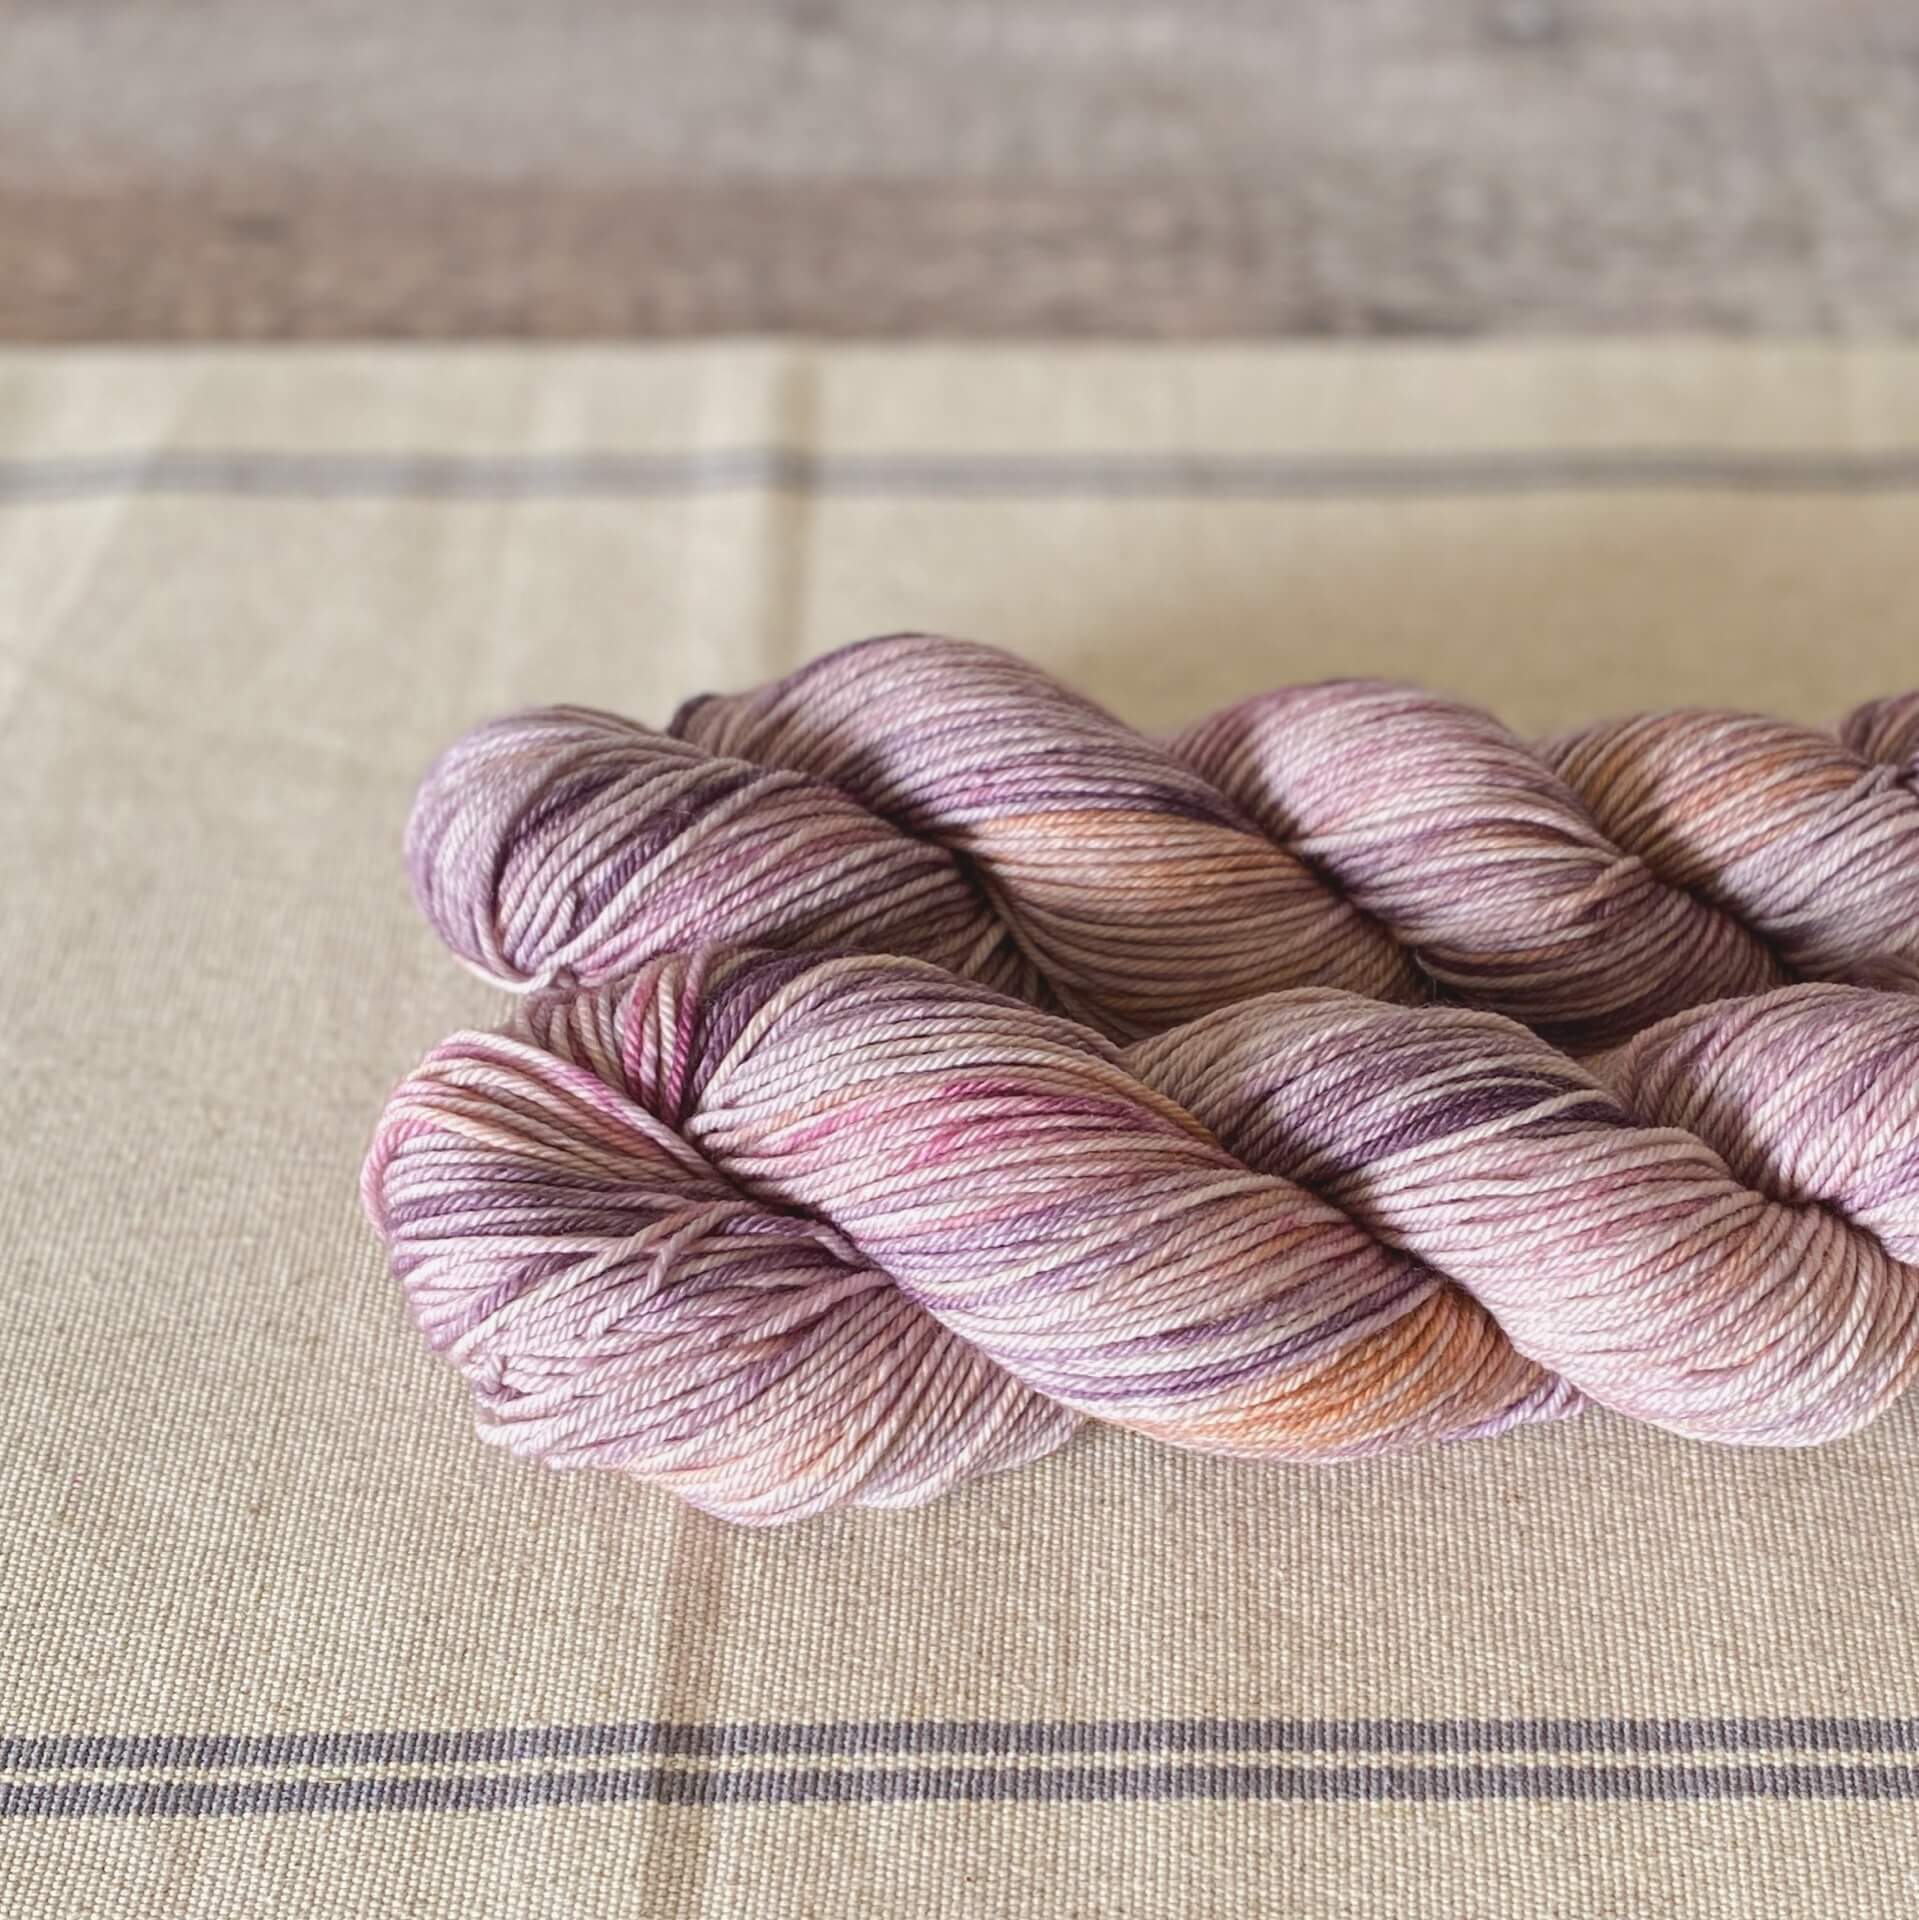 Two skeins of yarn lie on a linen table runner. The yarns have coloured in pinks and purples. 